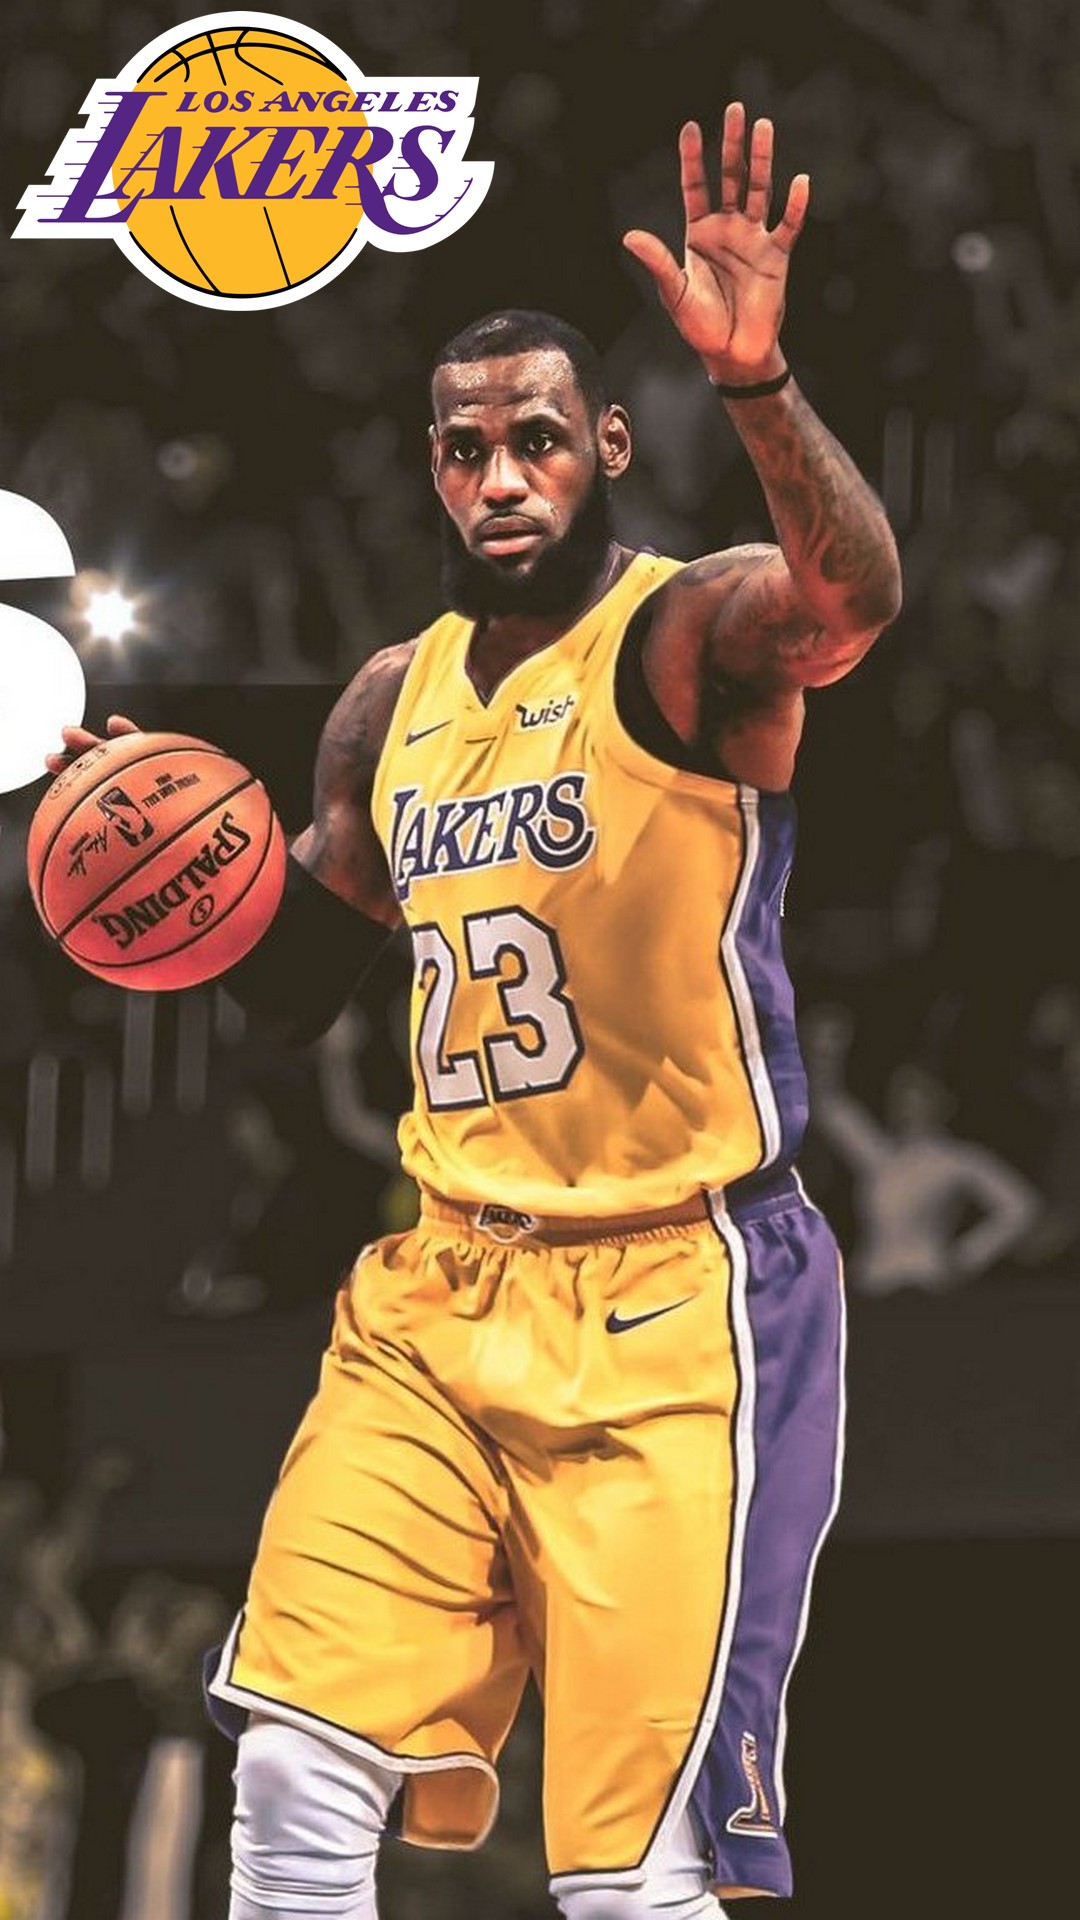 LA Lakers LeBron James HD Wallpaper For iPhone with image dimensions 1080x1920 pixel. You can make this wallpaper for your Desktop Computer Backgrounds, Windows or Mac Screensavers, iPhone Lock screen, Tablet or Android and another Mobile Phone device